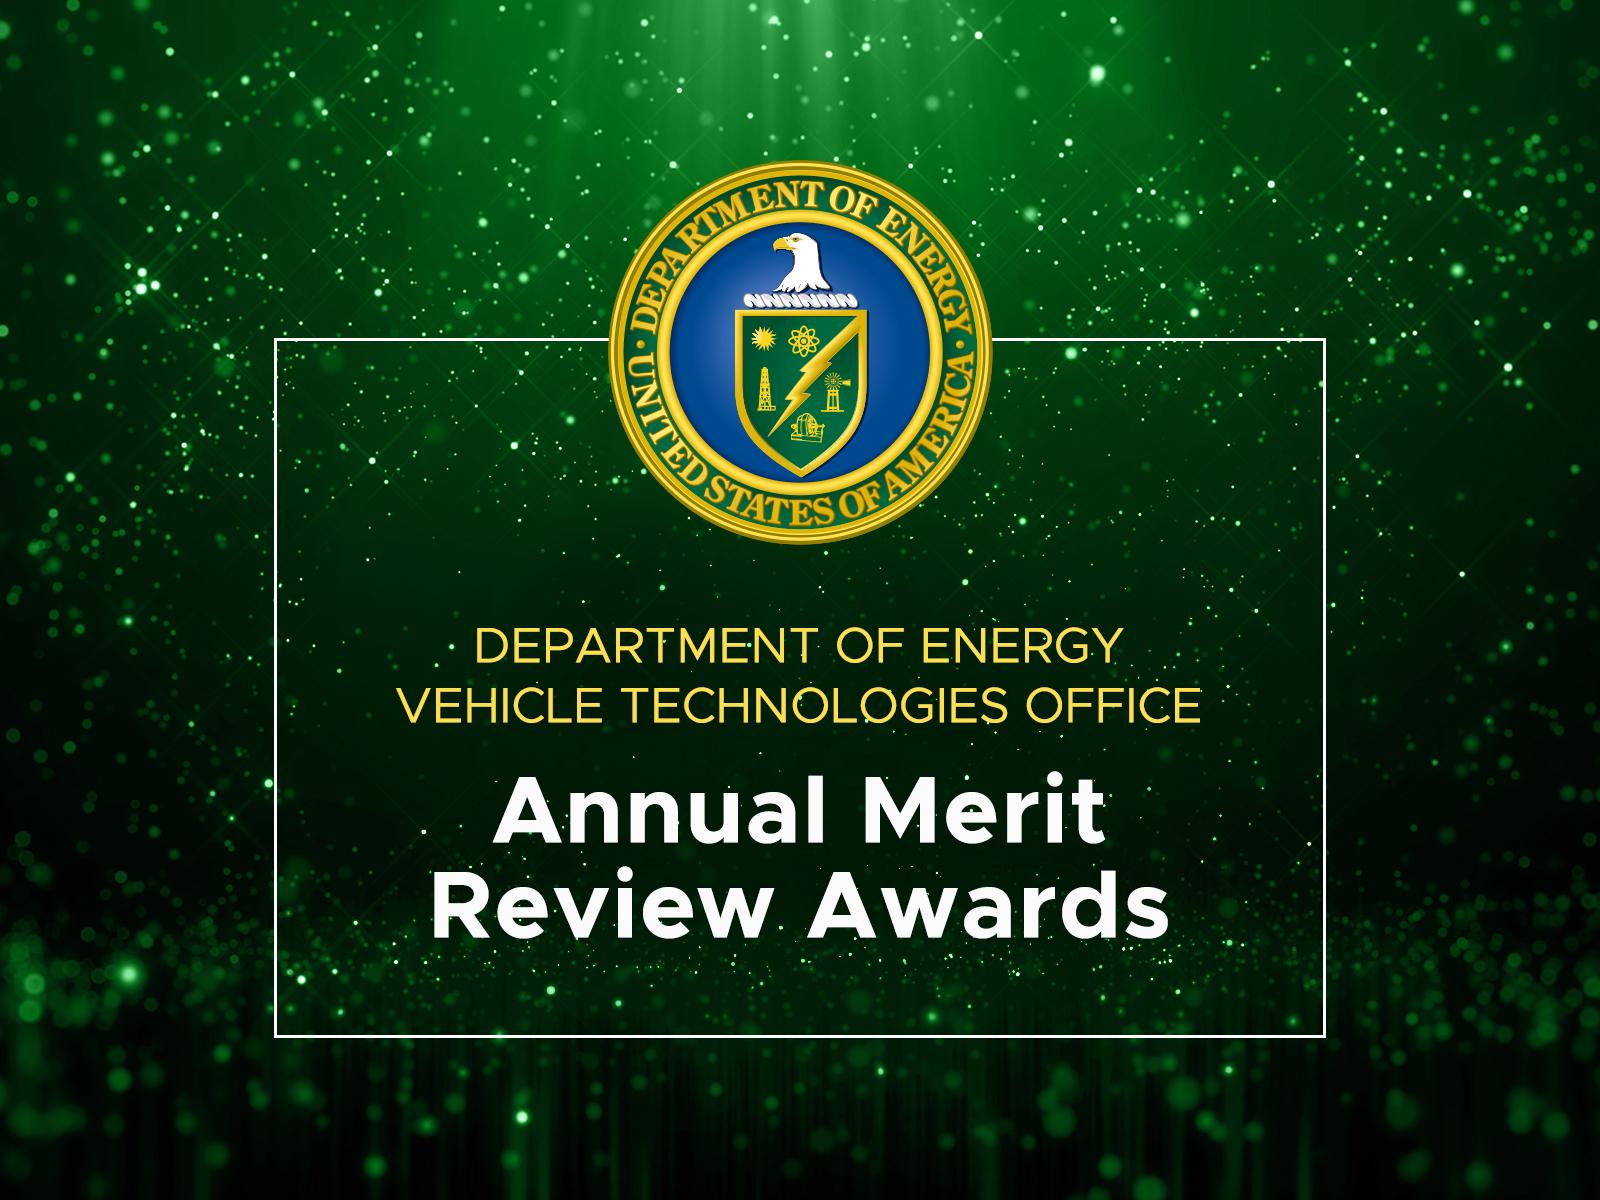 Department of Energy Vehicle Technologies Office Annual Merit Review Awards